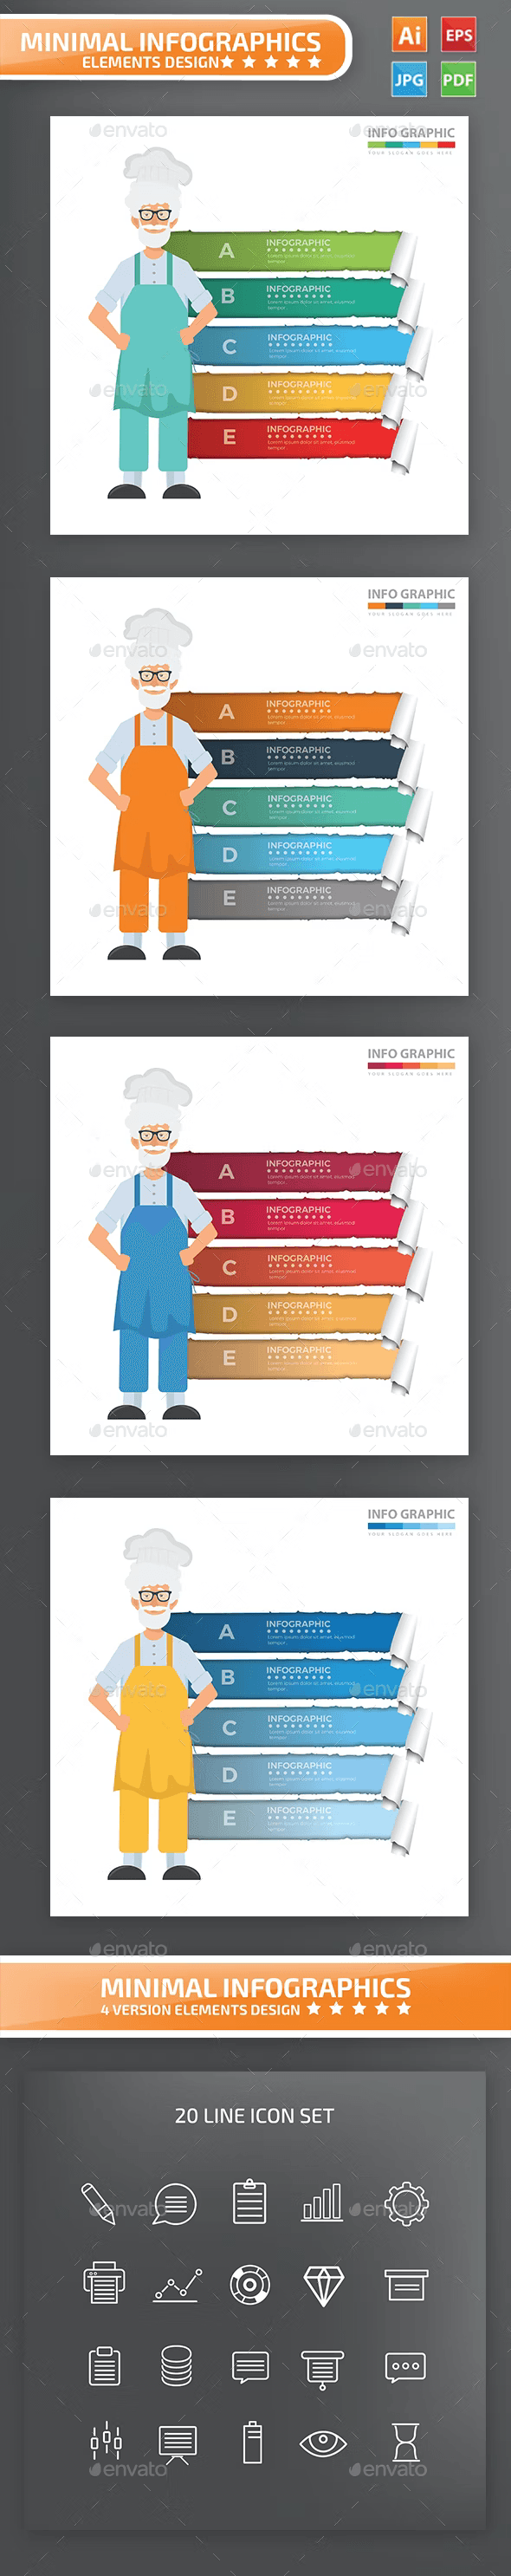 Illustrations preview chef infographics.